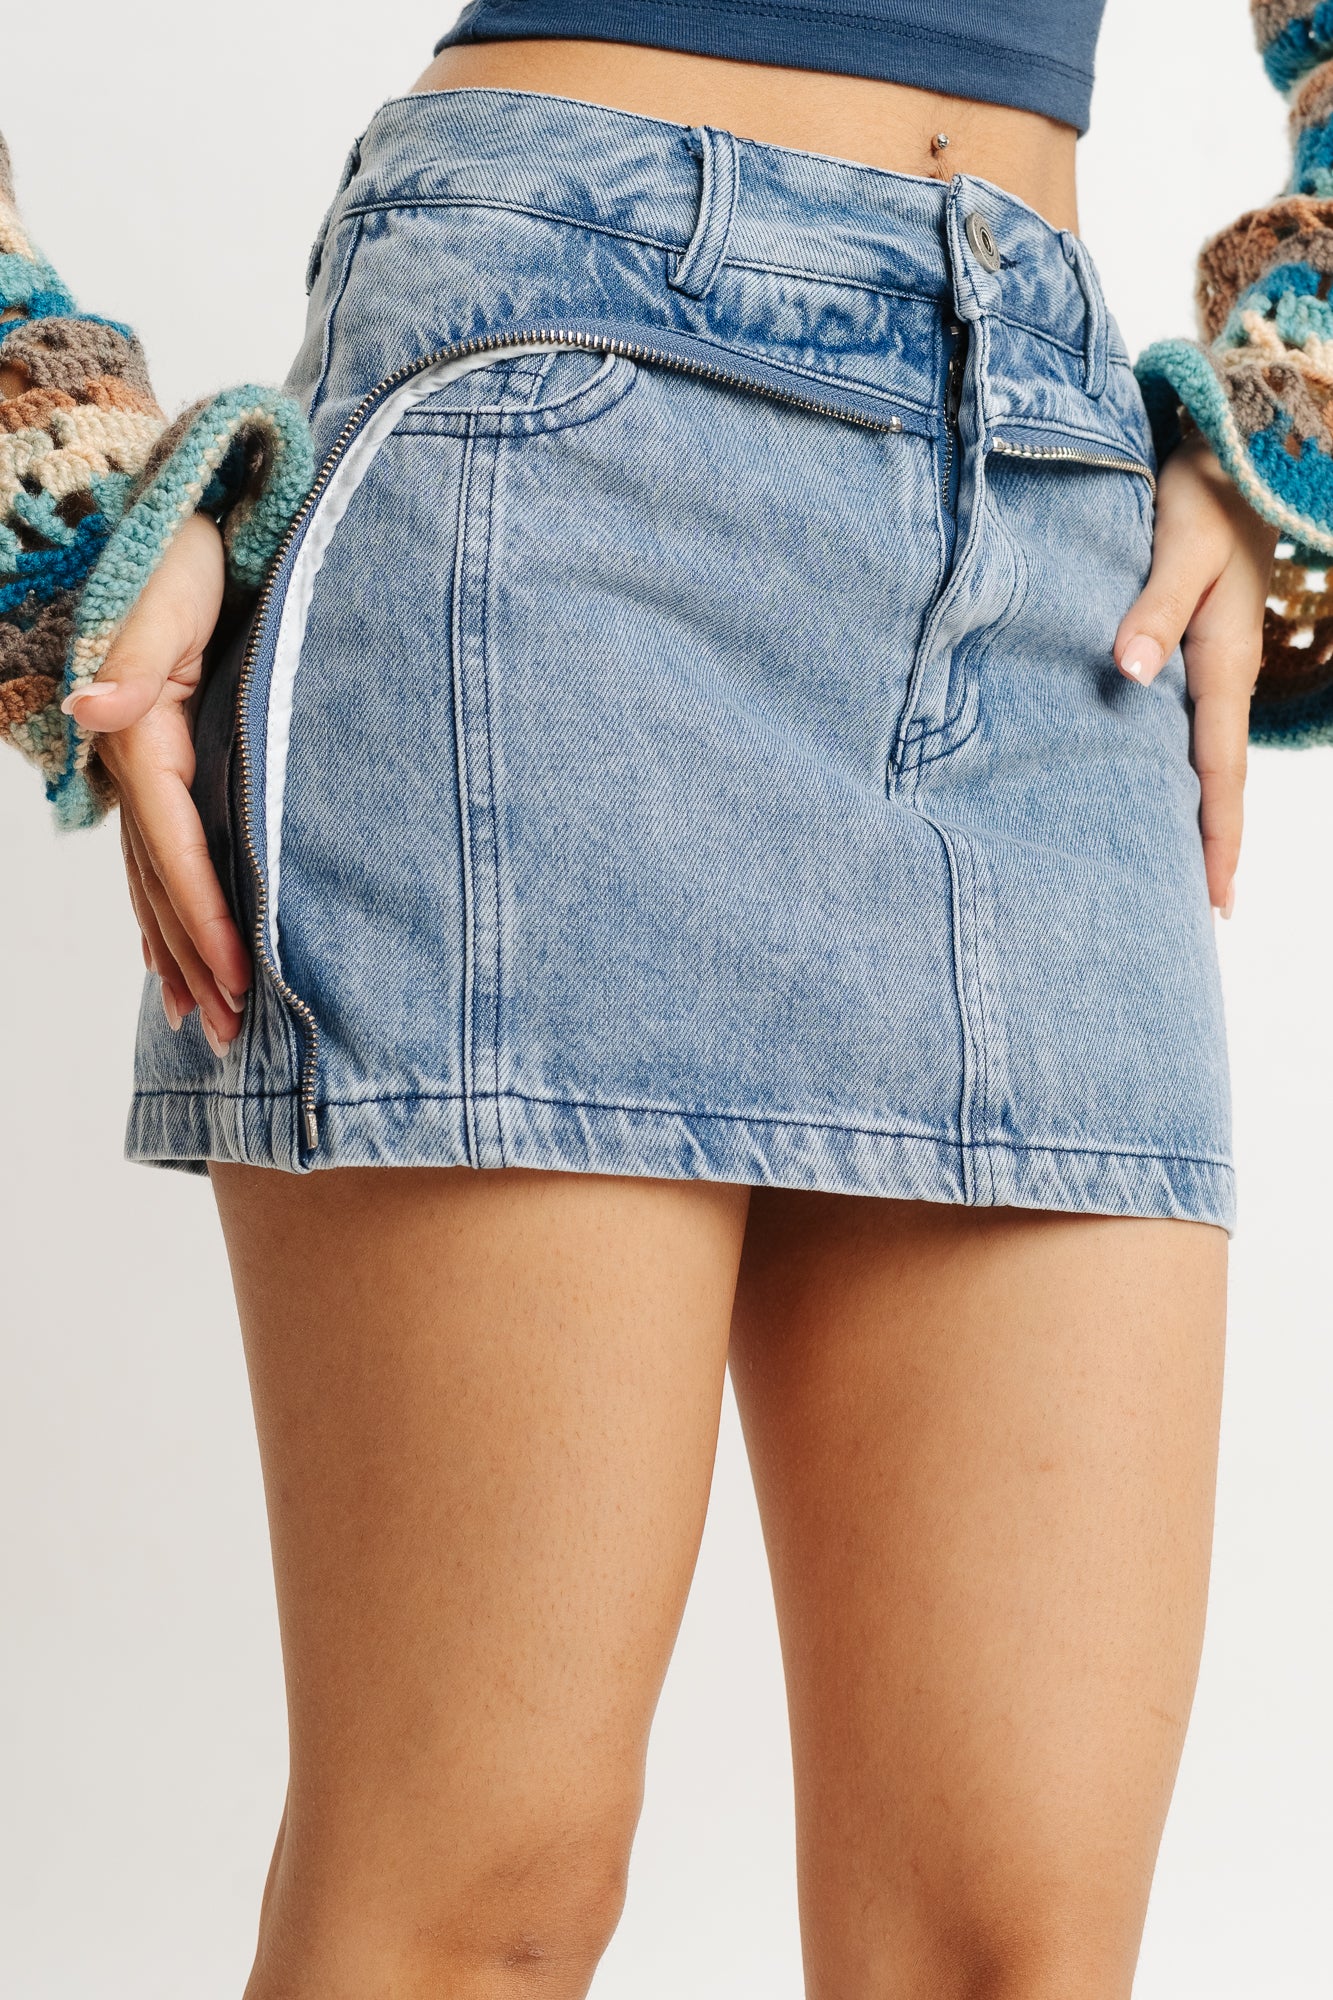 Judy Blue High Waisted Classic Fit Denim Skirt - Whiskey Skies